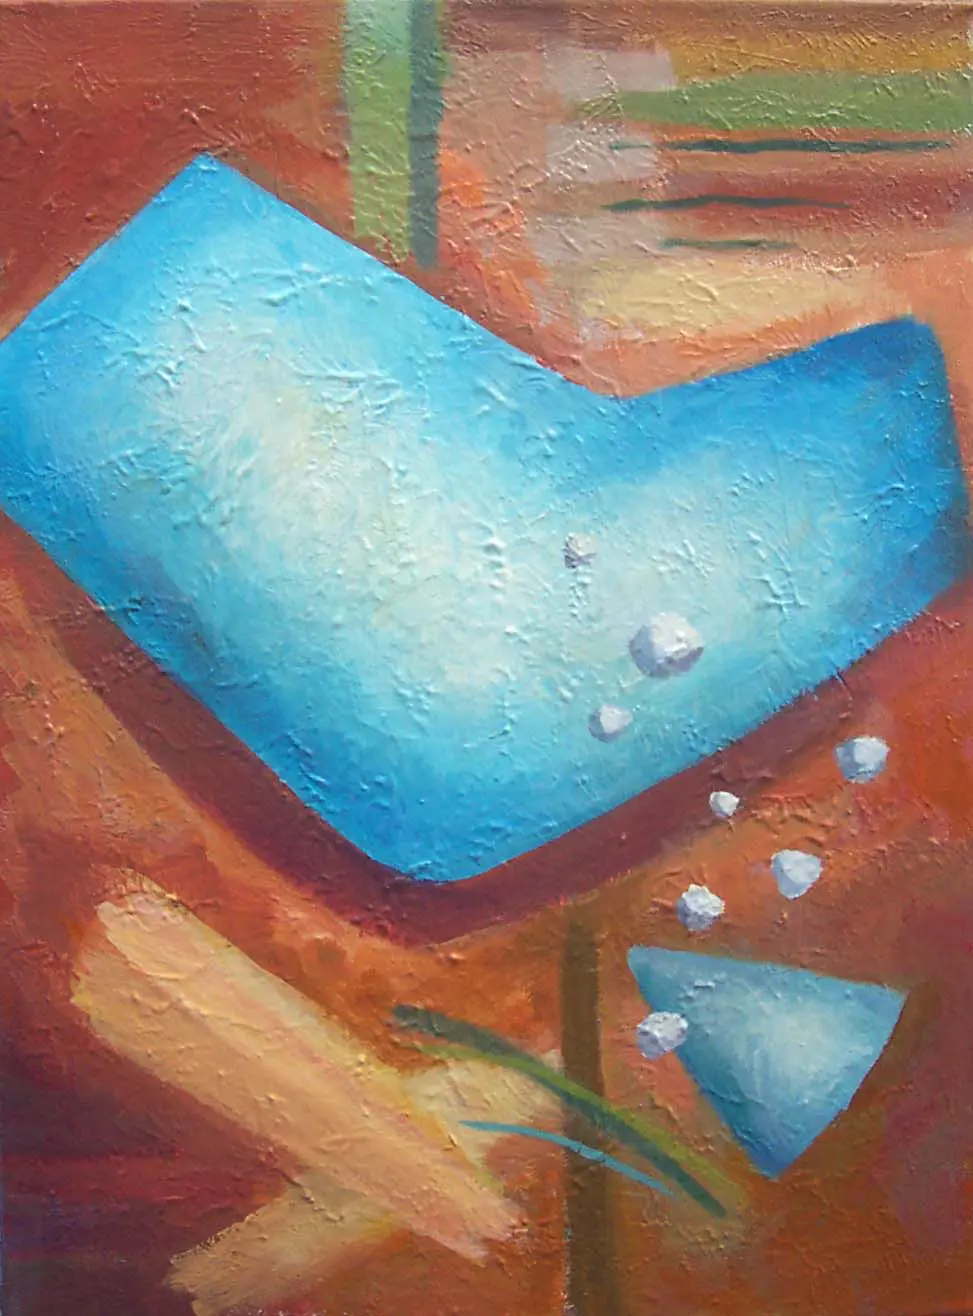 A painting of a blue object with white dots on it.